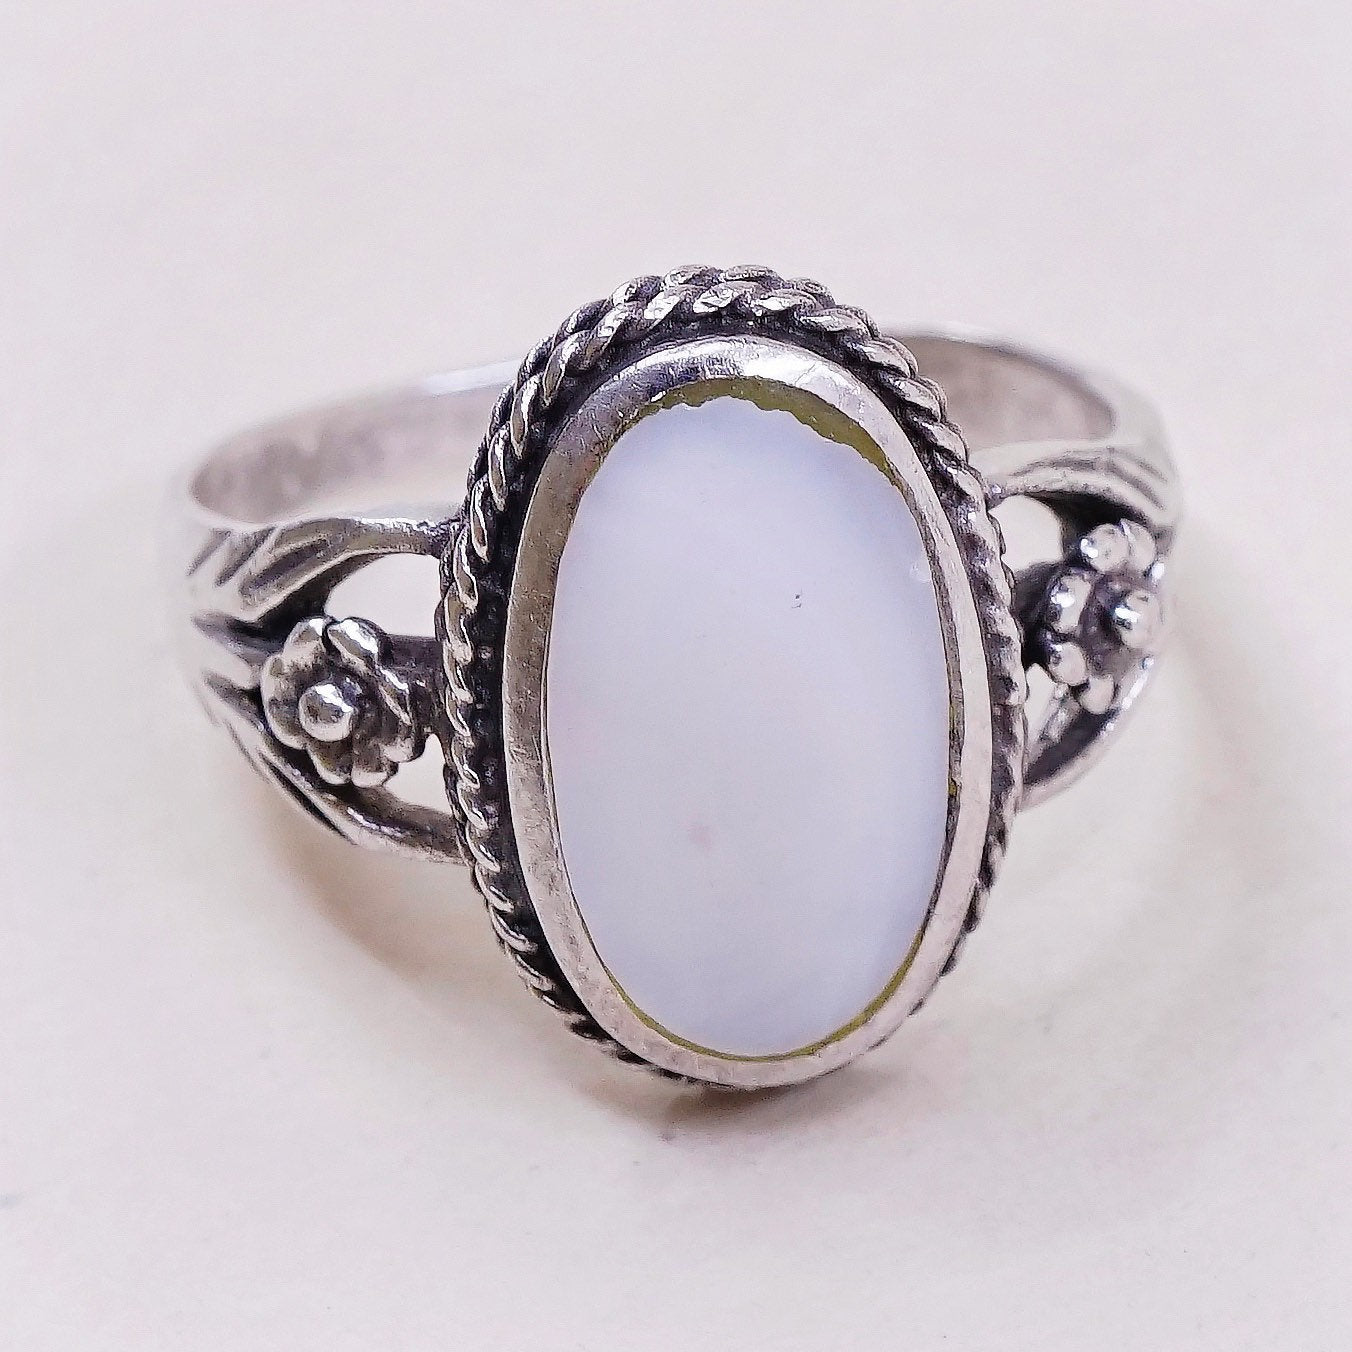 sz 7.75, vtg sterling silver handmade ring, 925 w/ mother of pearl